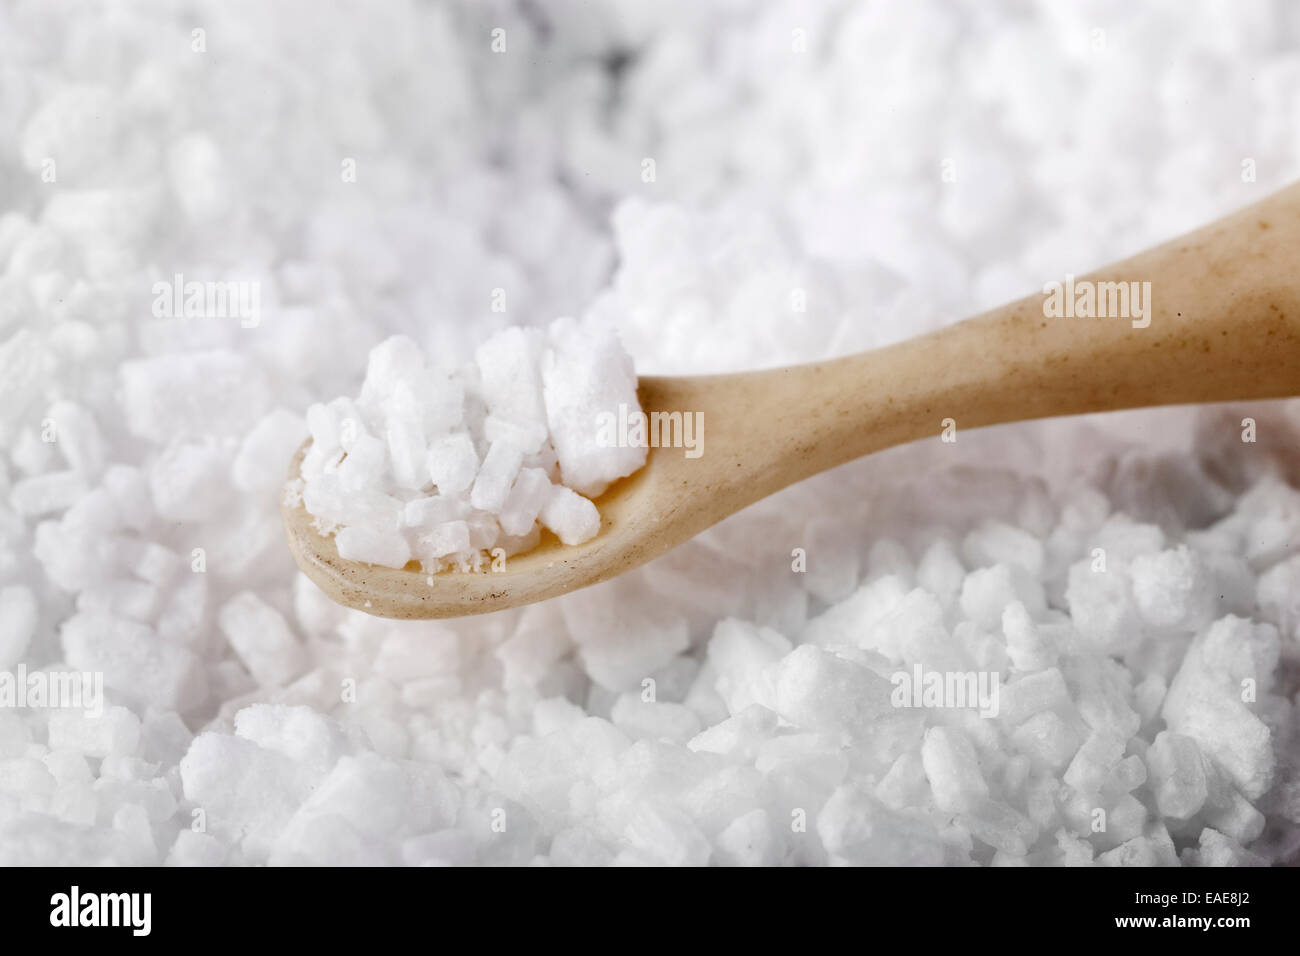 drug use showing cocaine spoon and powder Stock Photo